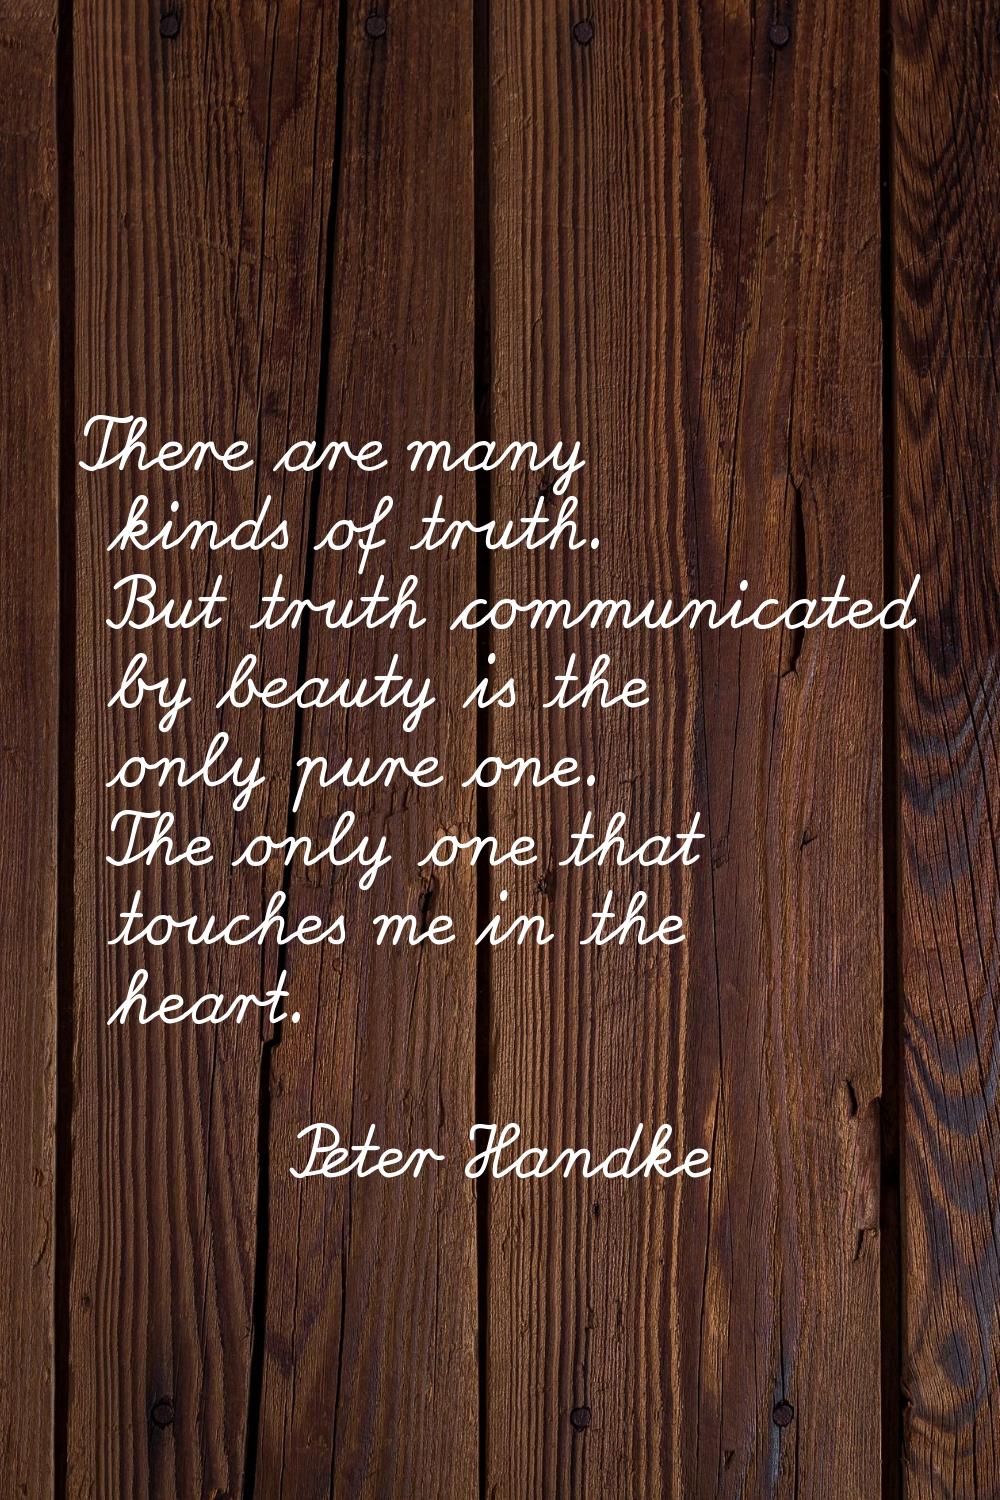 There are many kinds of truth. But truth communicated by beauty is the only pure one. The only one 